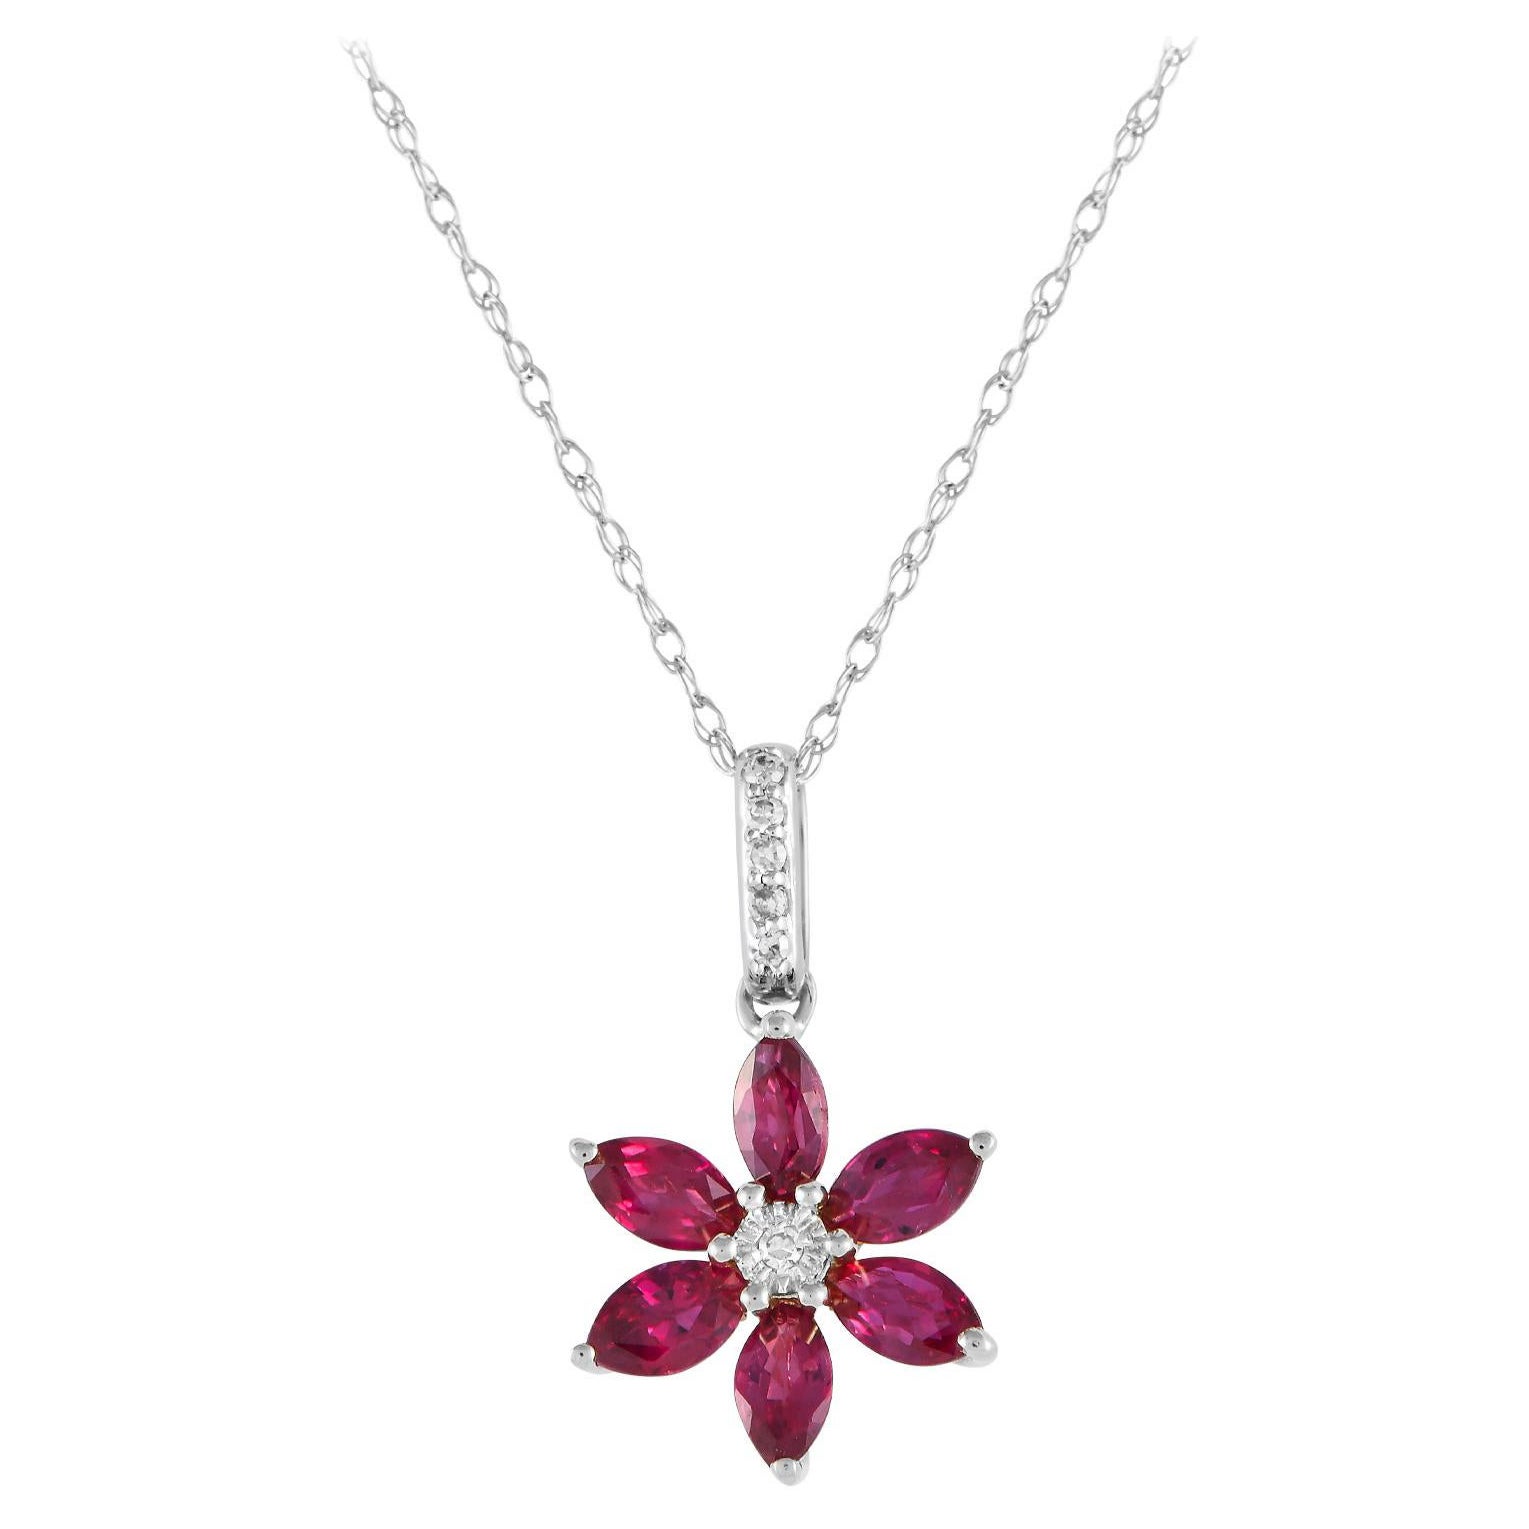 LB Exclusive 14K White Gold 0.01ct Diamond and Ruby Flower Necklace PD4-16241WRU